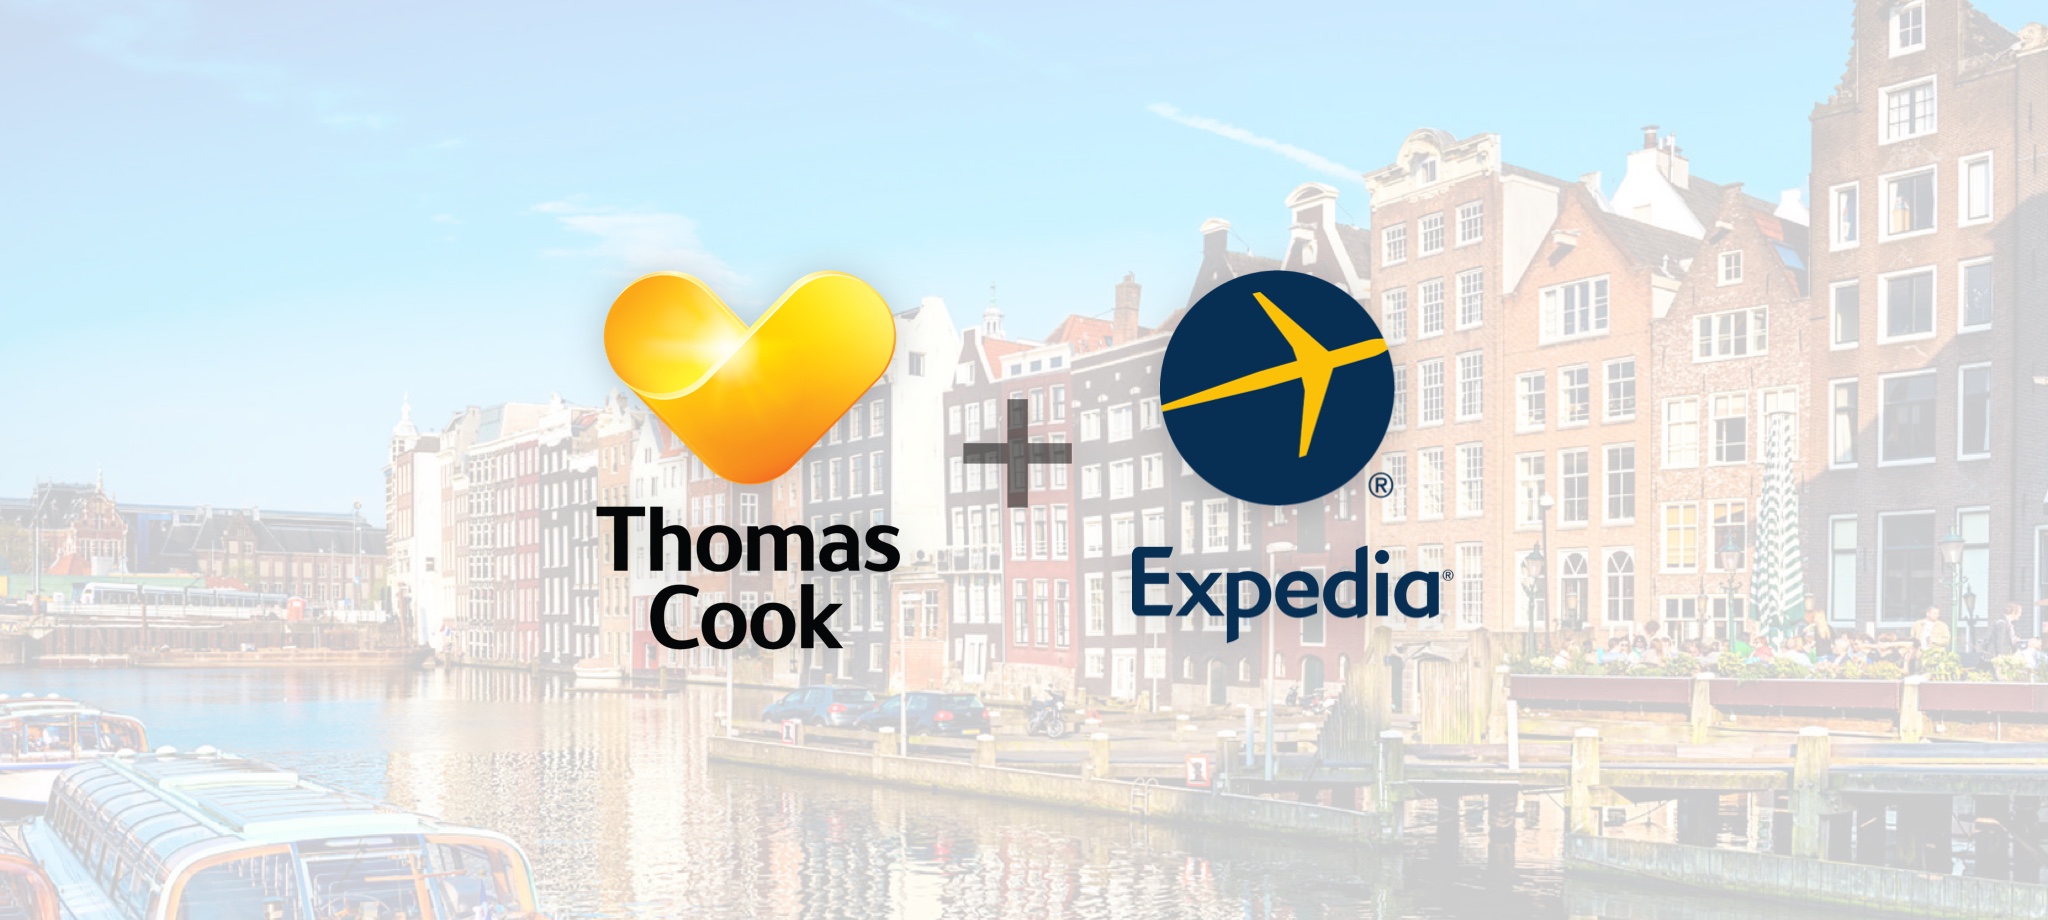 Project: Thomas Cook and Expedia